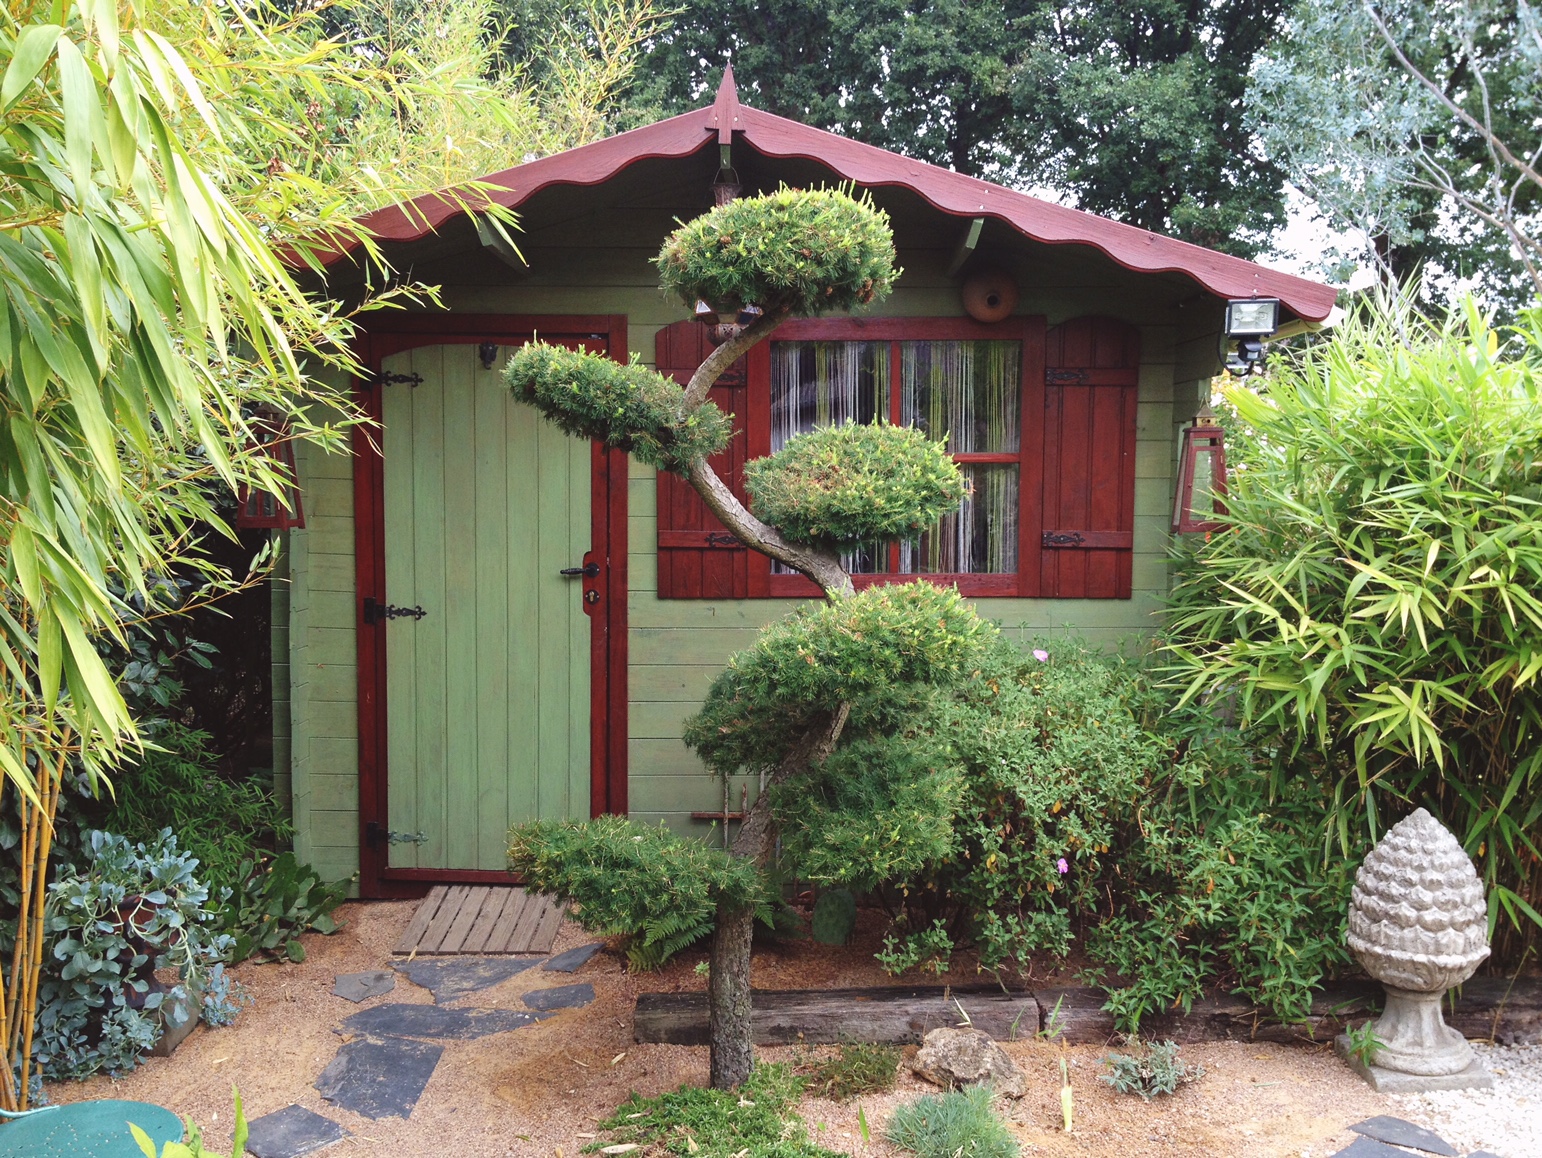 Cute shed in a french town garden. See the makeover.